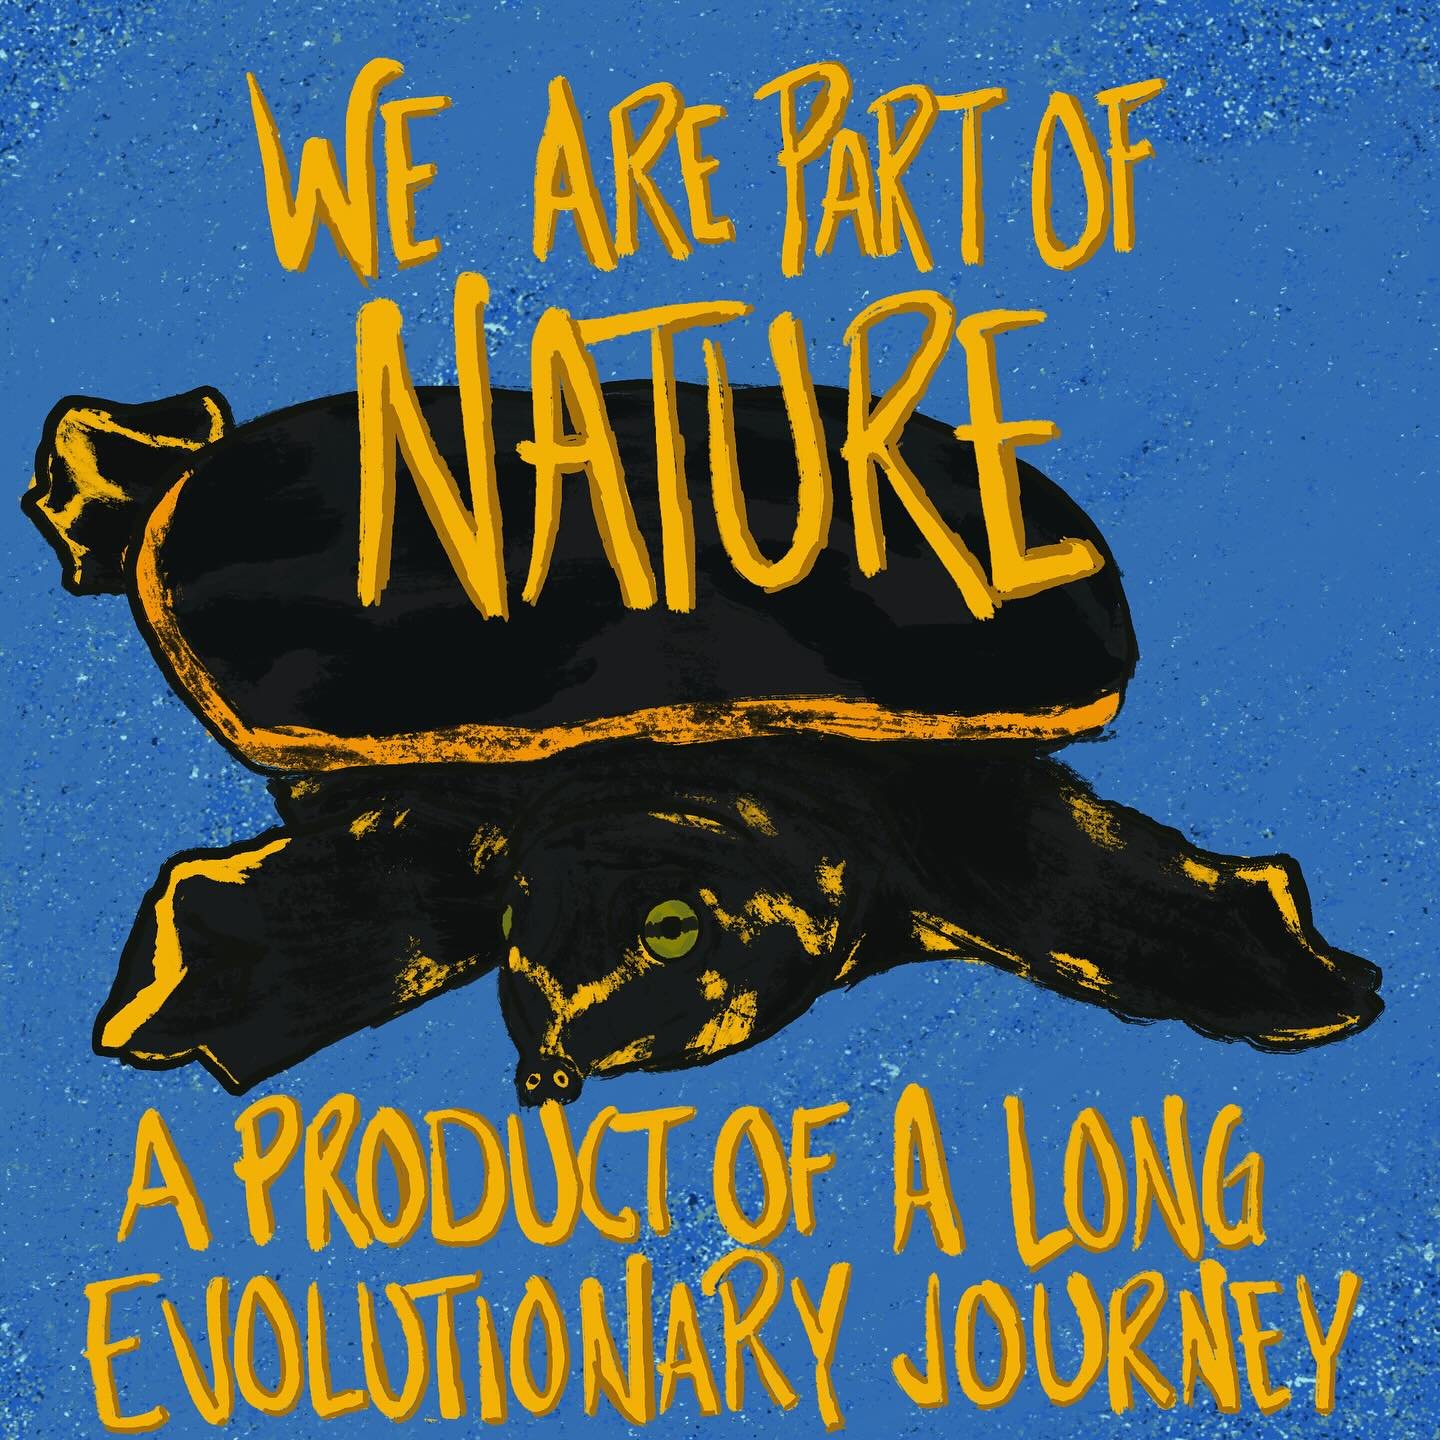 &ldquo;We are part of nature, a product of a long evolutionary journey. To some degree, we carry the ancient oceans in our blood. &hellip; Our brains and nervous systems did not suddenly spring into existence without long antecedents in natural histo